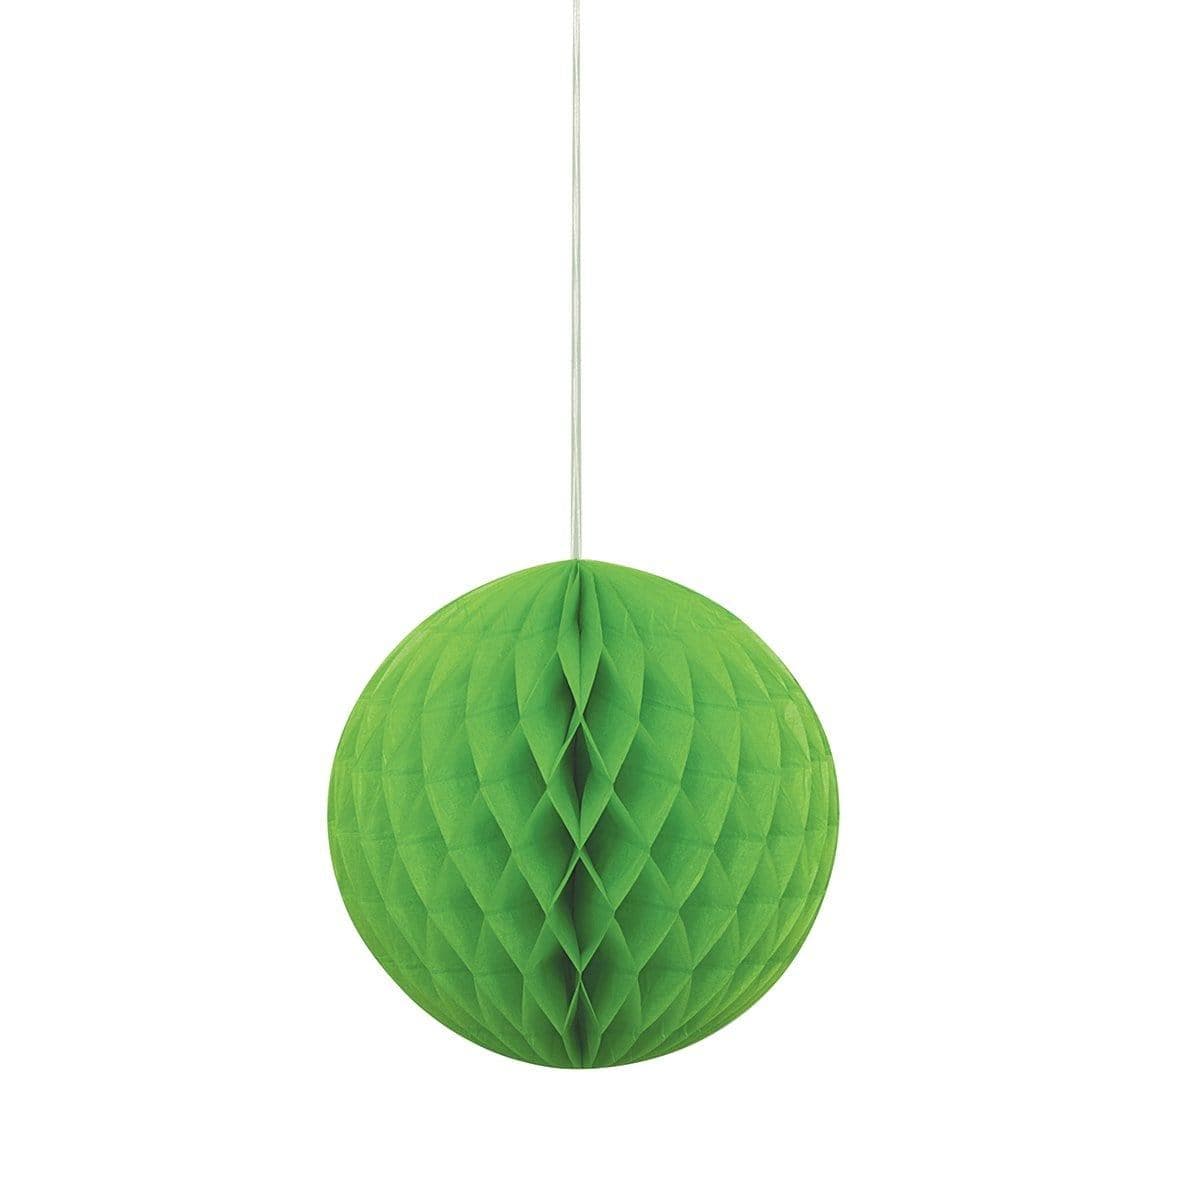 Buy Decorations Honeycomb Ball 8 In. - Lime Green sold at Party Expert